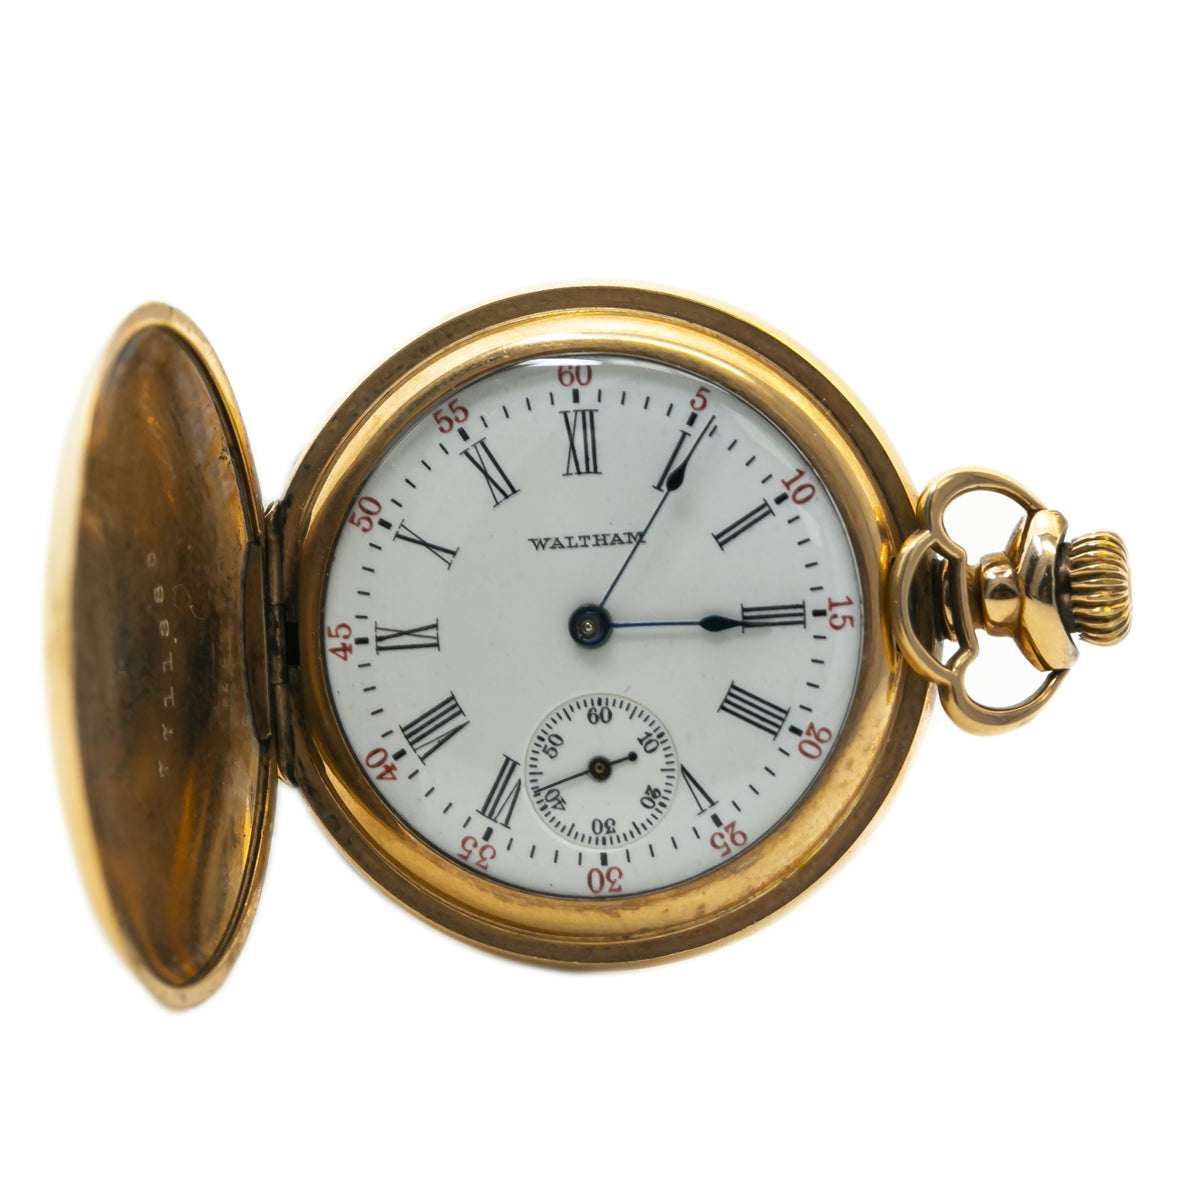 Waltham 7711385 Vintage Pocket Watch 14k Yellow Gold Filled WhiteDial 35mm AS-IS